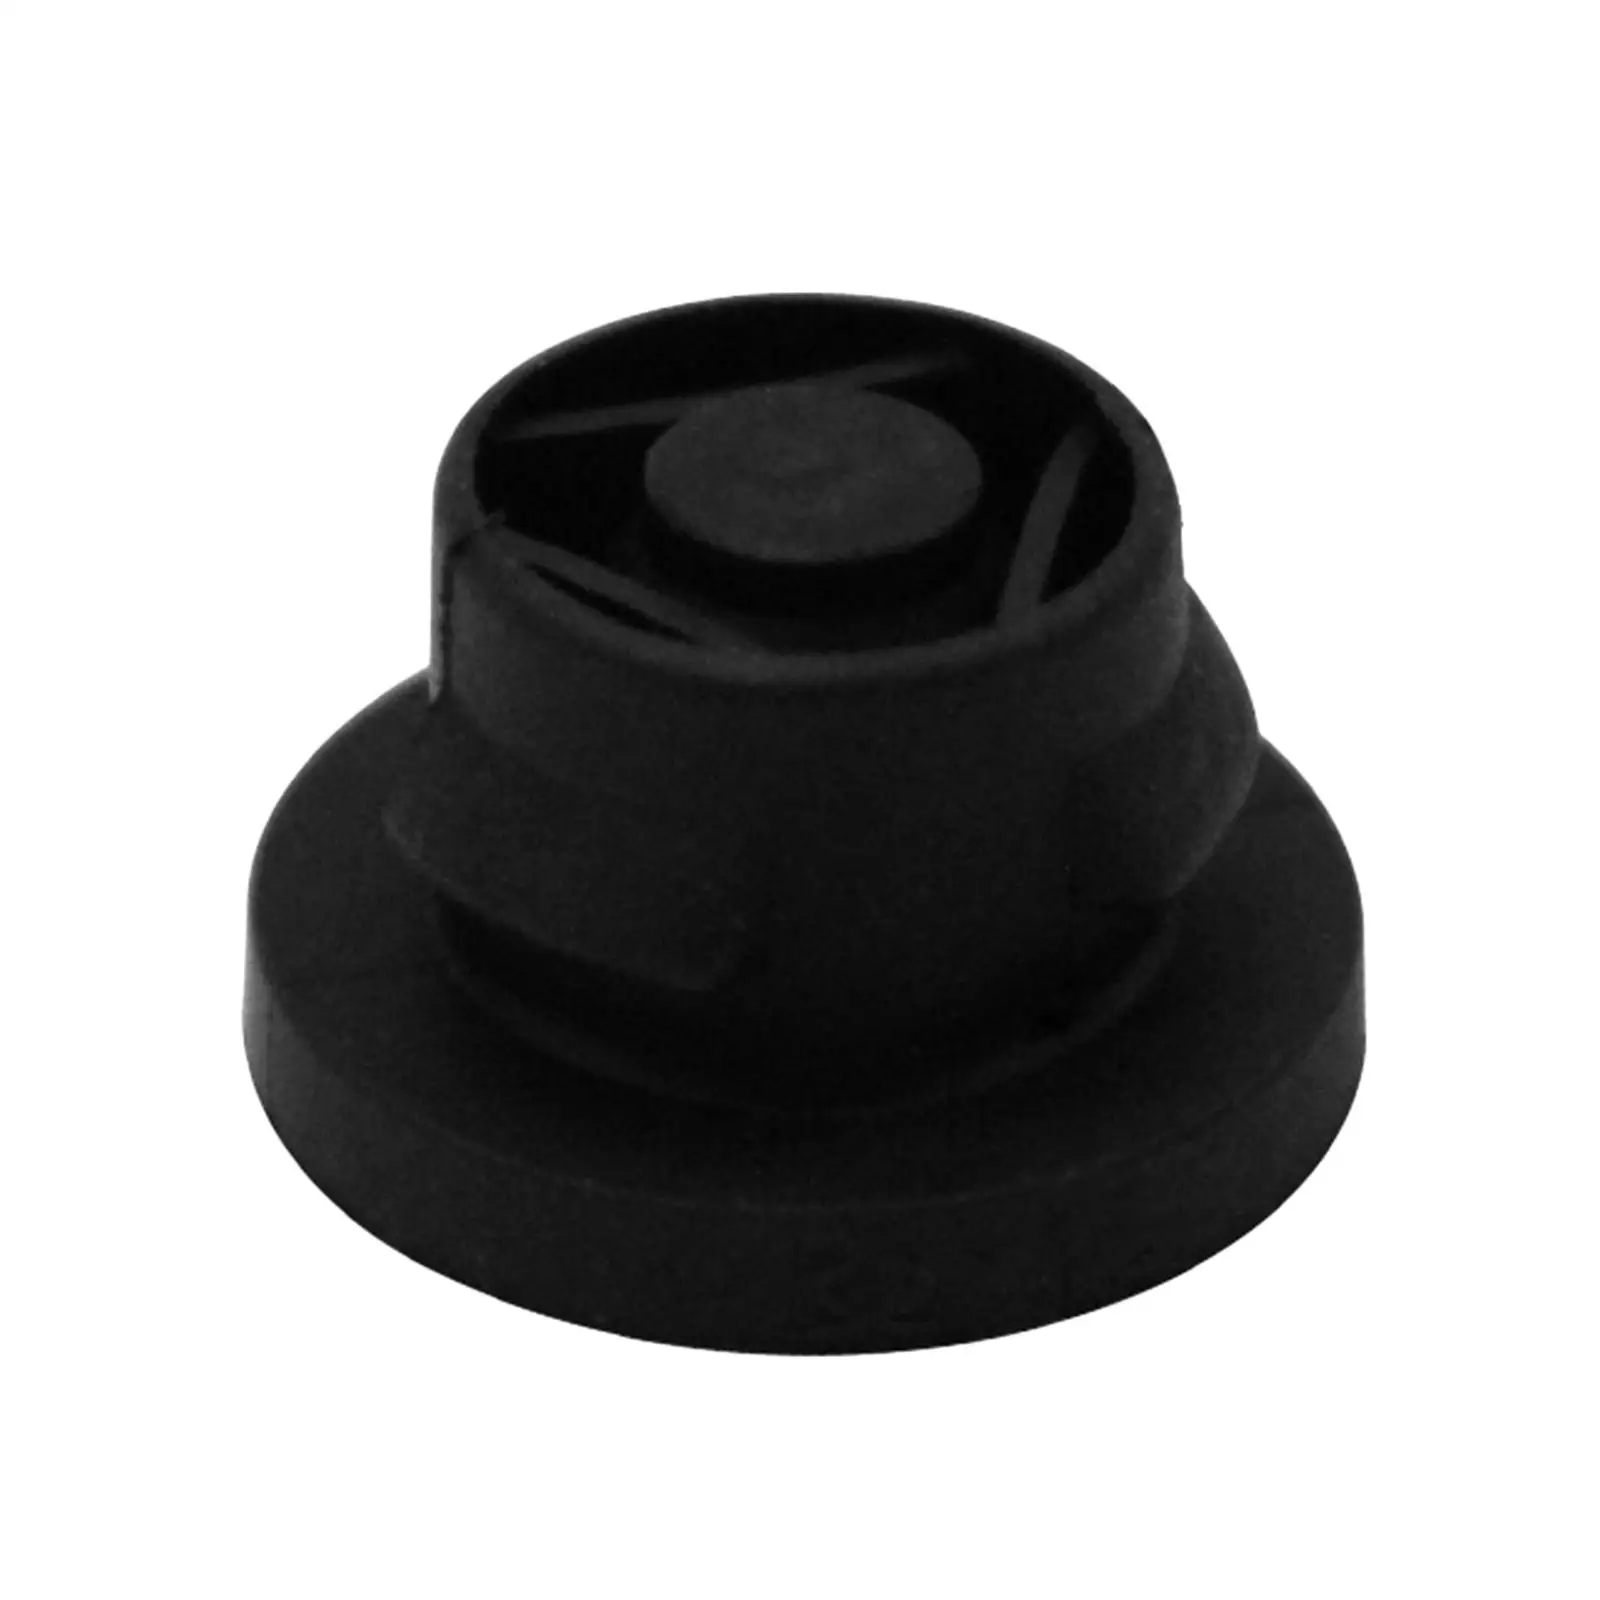 Automotive Air Filter Rubber Insert Fit for 1.6 Hdi for 207